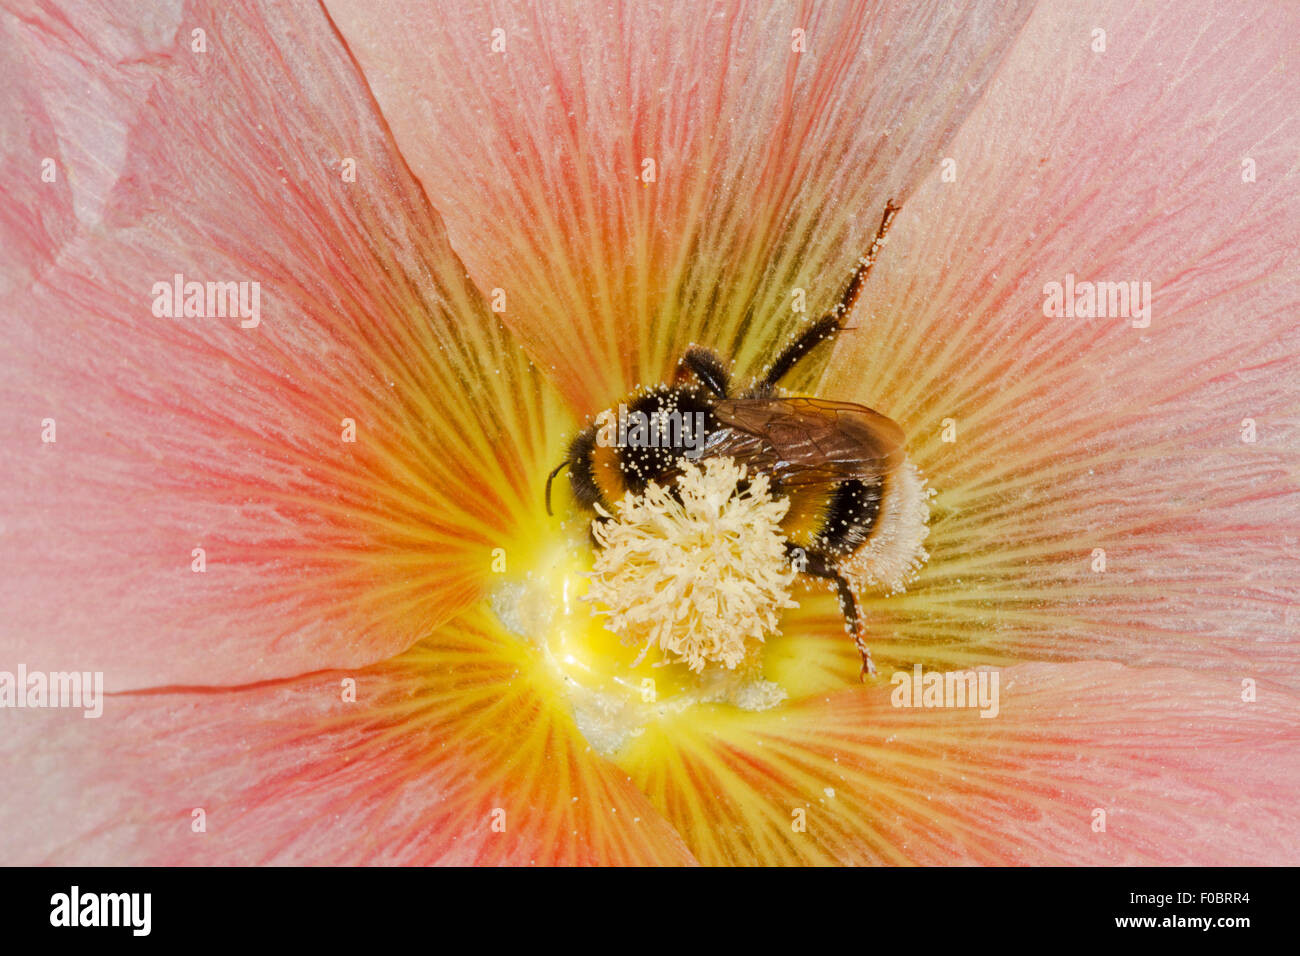 Large earth bumblebee (Bombus terrestris), covered with pollen, in the flower of a pink Common hollyhock (Alcea rosea) Stock Photo